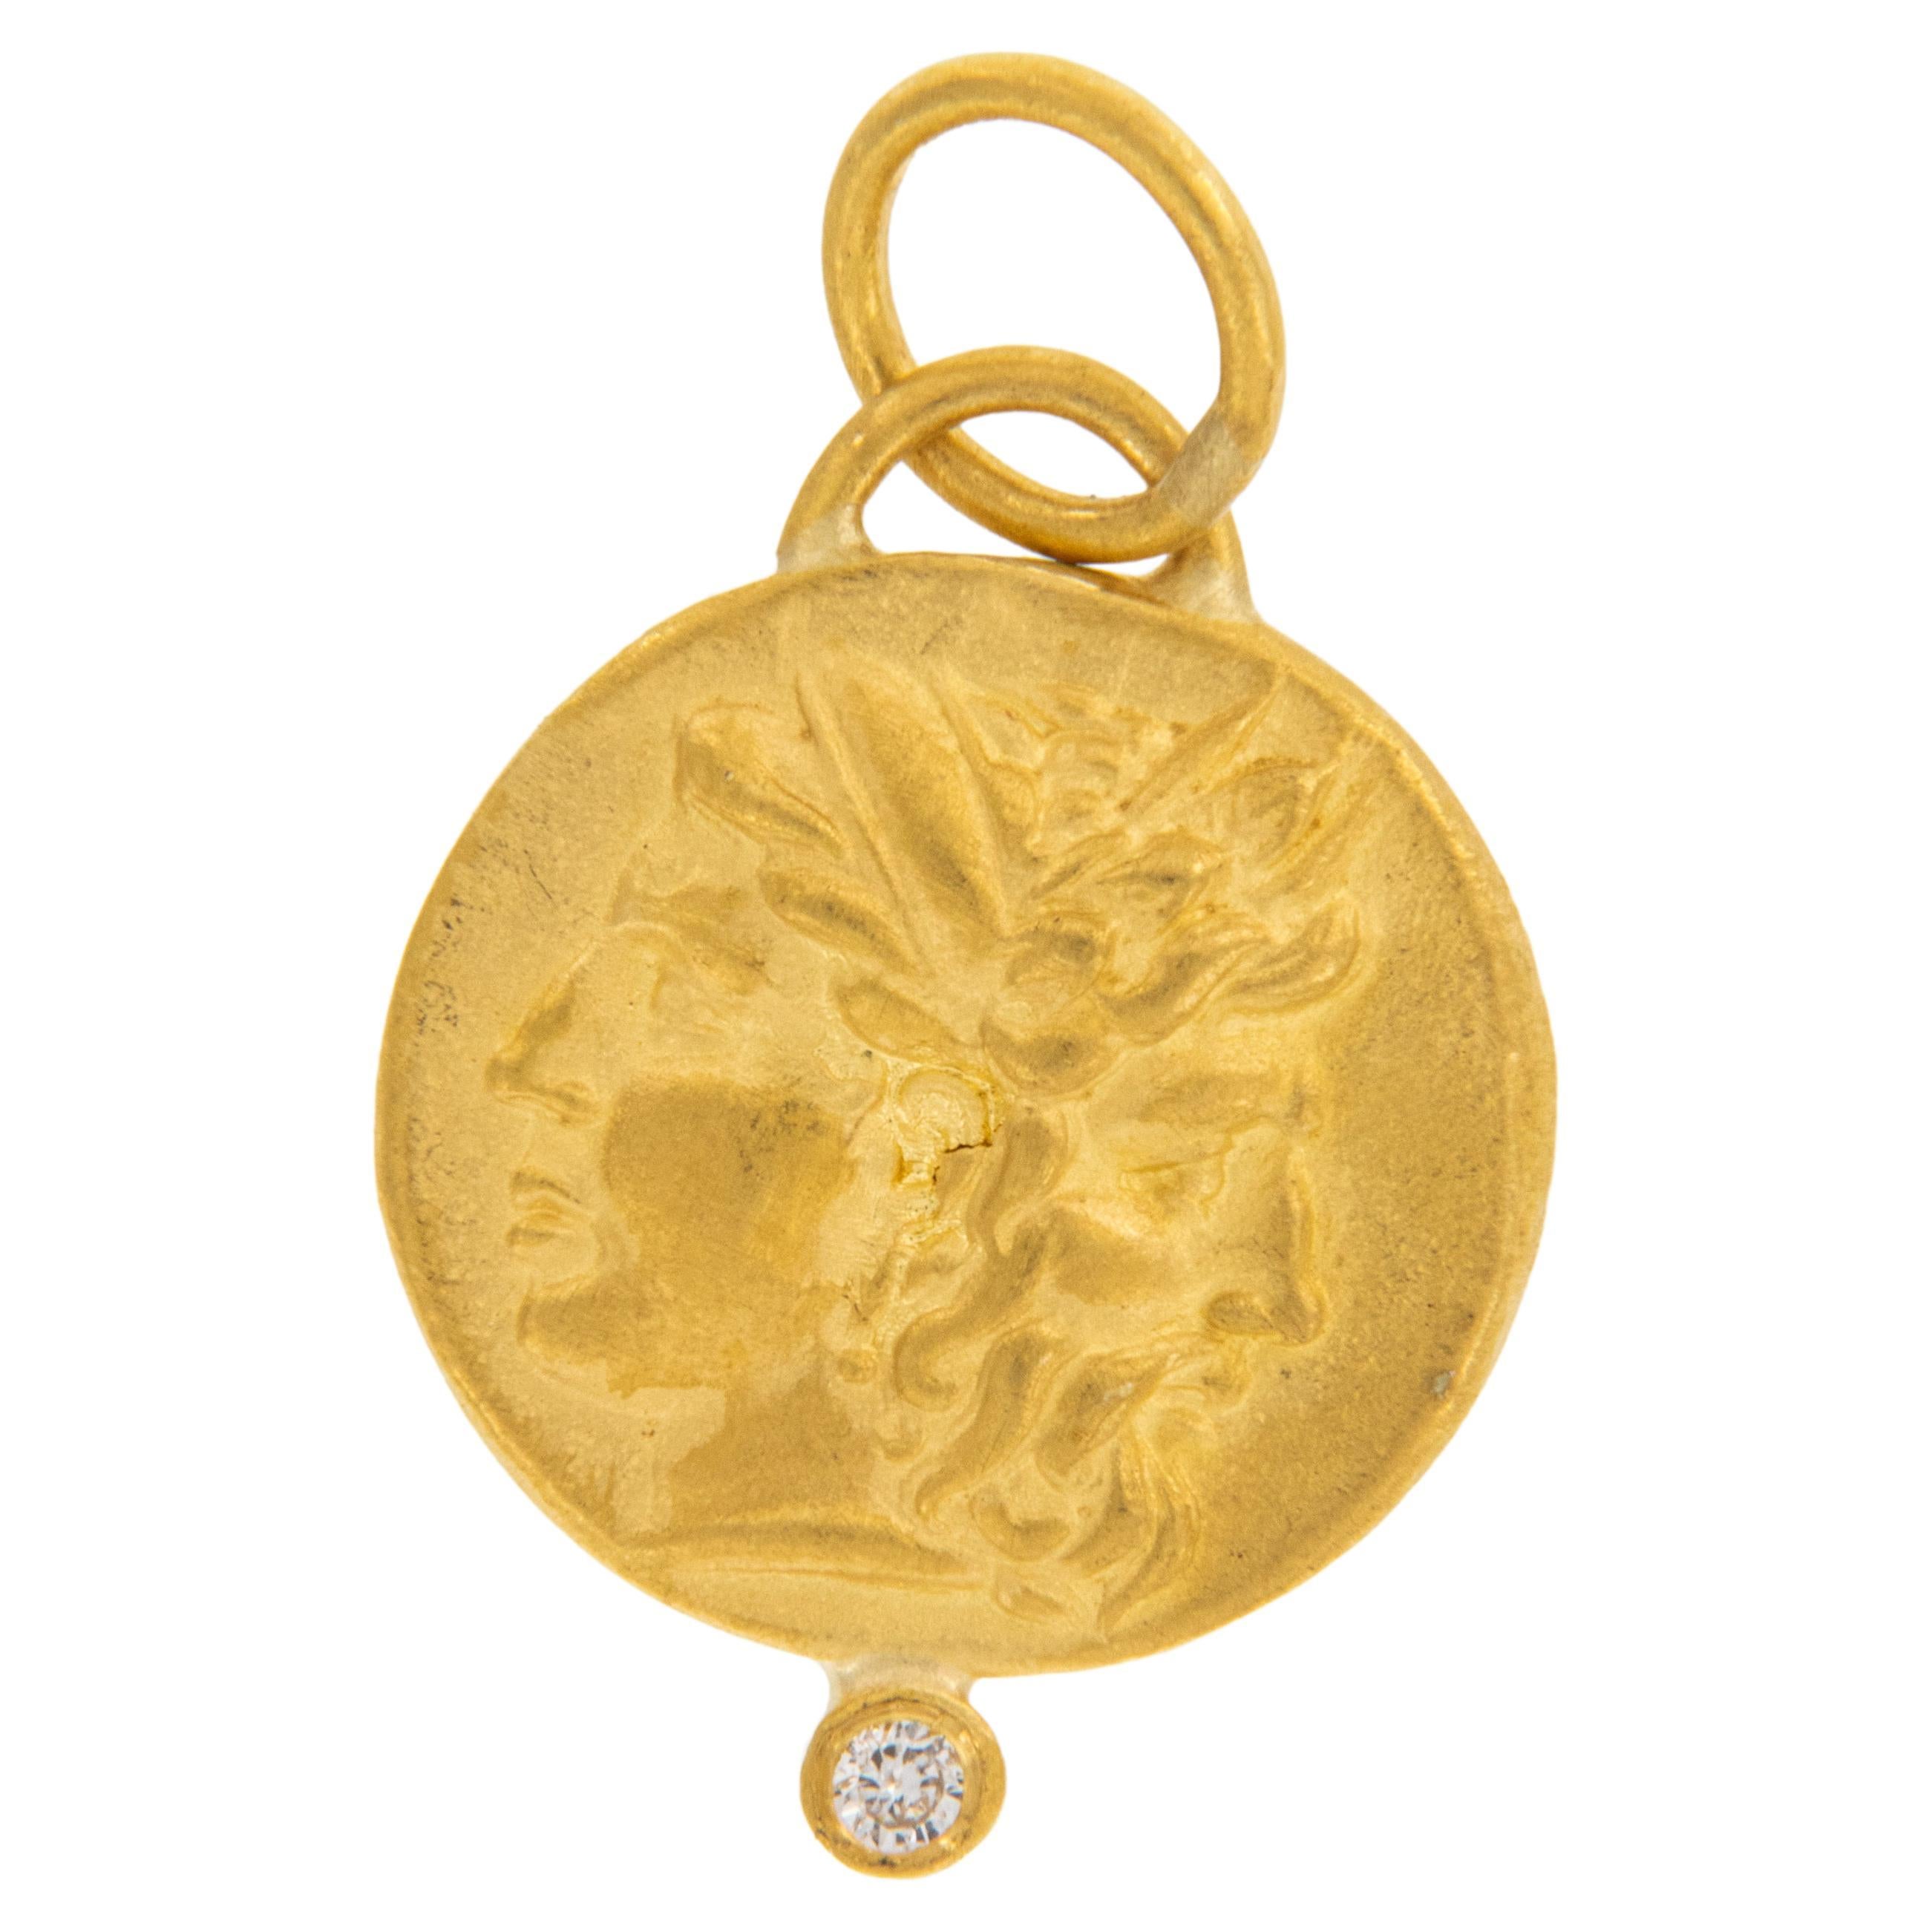 24 Karat Gold  Reproduction Janus Double Headed Coin Pendant Charm with Diamond For Sale